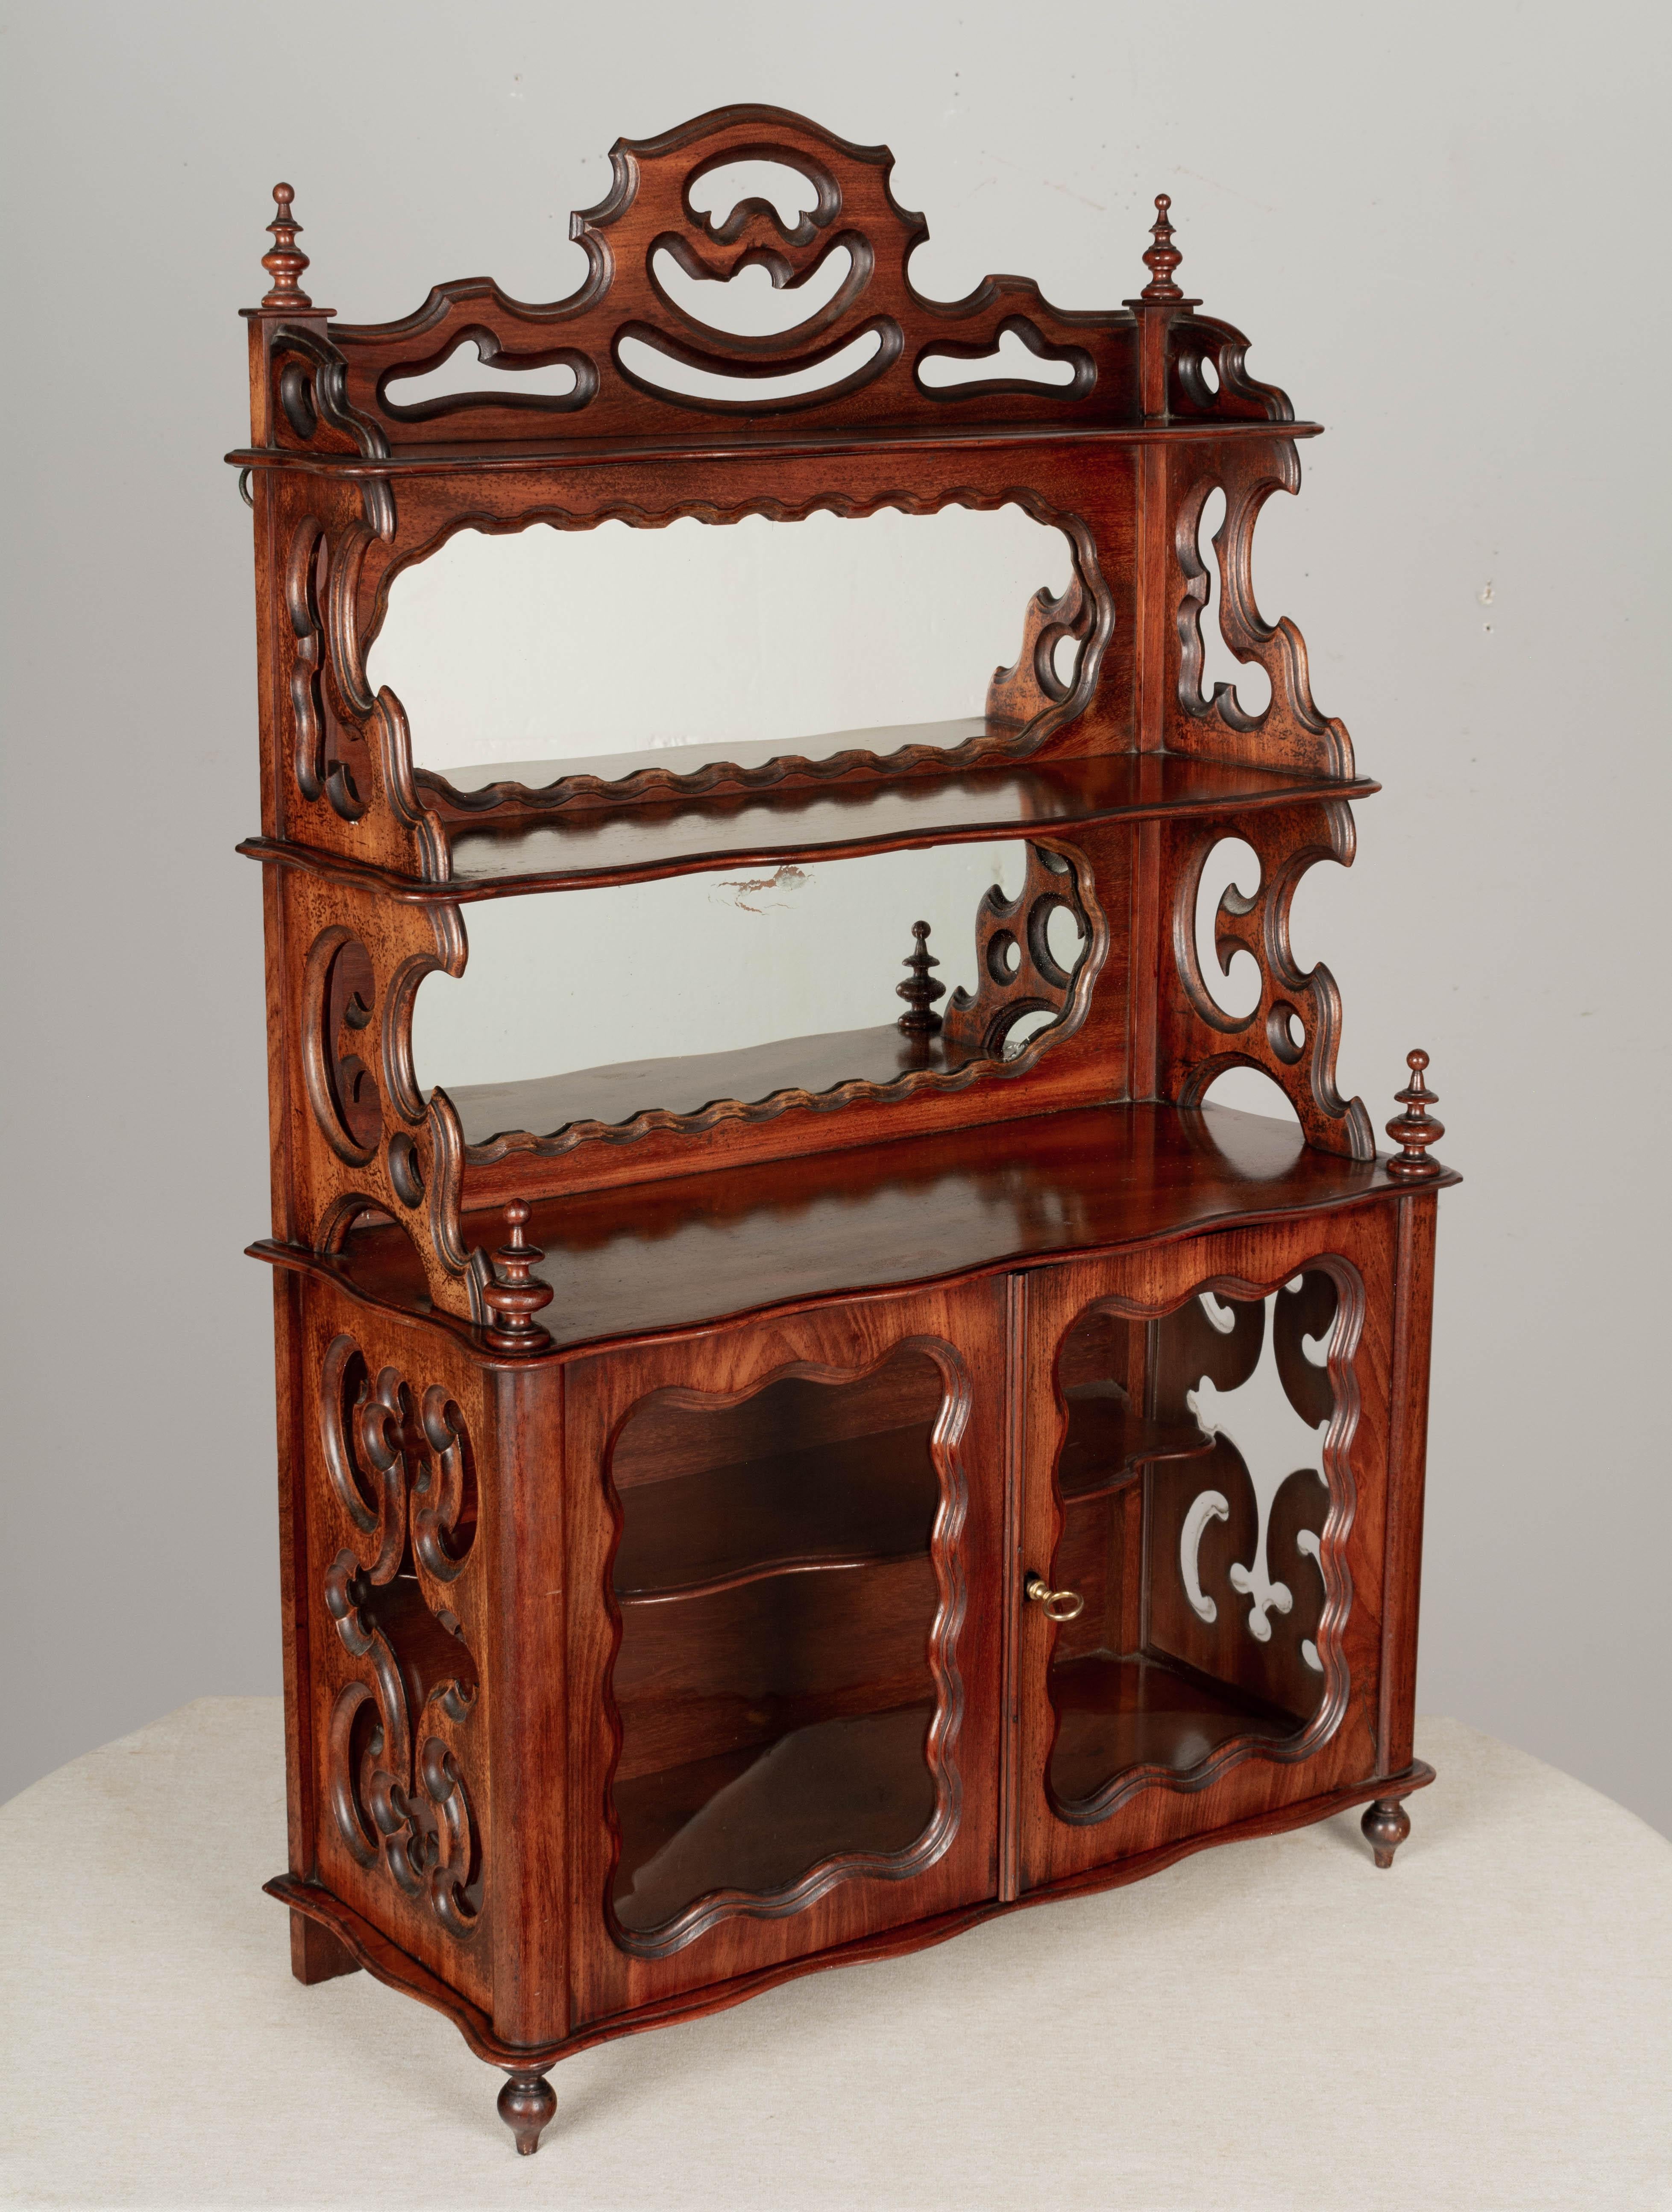 A 19th century French Louis Philippe style vitrine or miniature buffet, made of solid mahogany with glass cabinet doors and mirror backed tiered shelves. Glass cabinet door opens to one shelf. Working lock and key, missing escutcheon. Beautifully